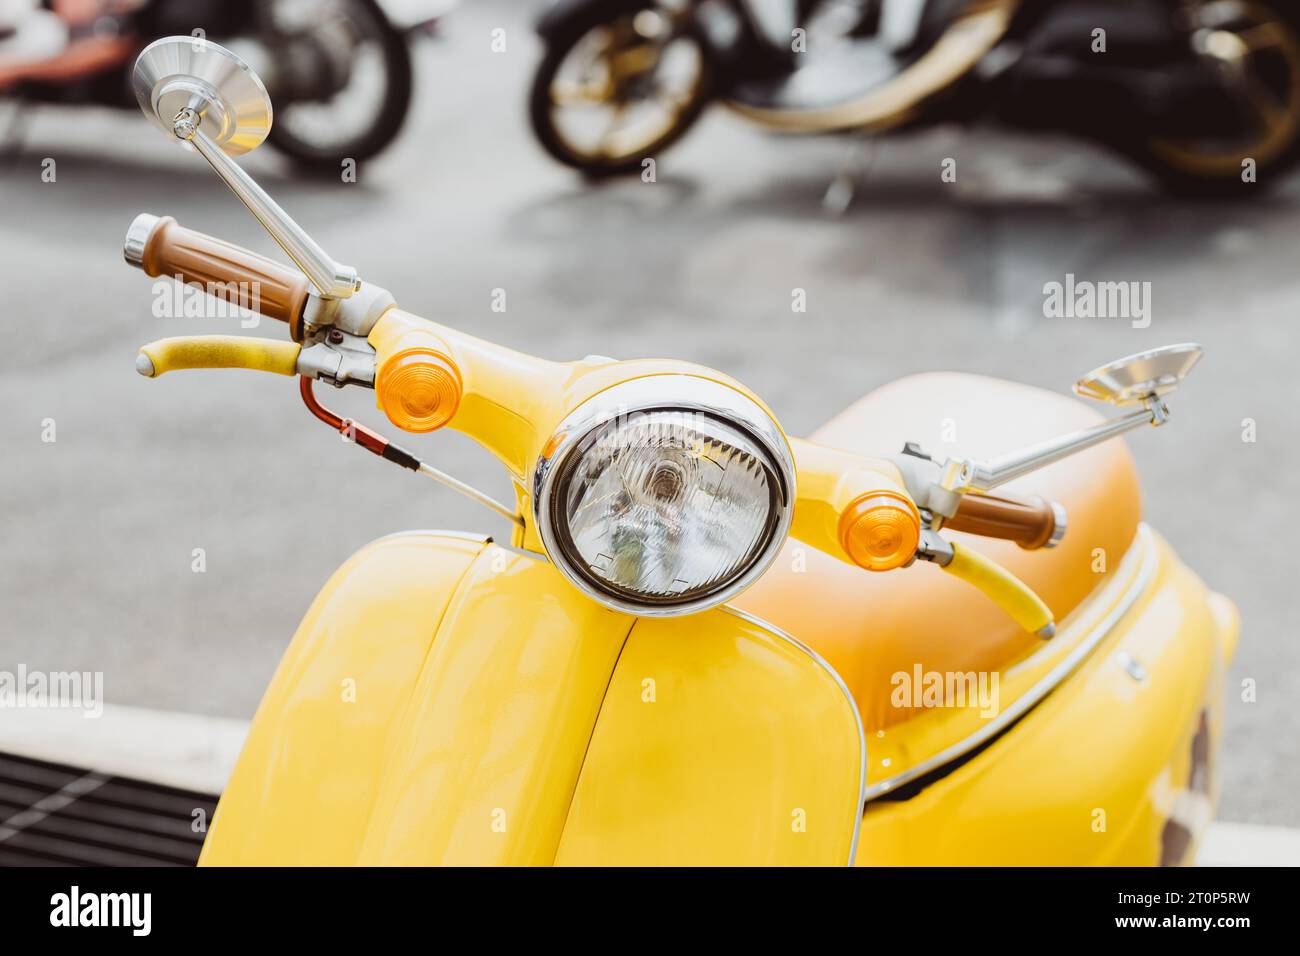 modern mini scooter motorcycle classic vintage retro style decoration most popular in many country Stock Photo